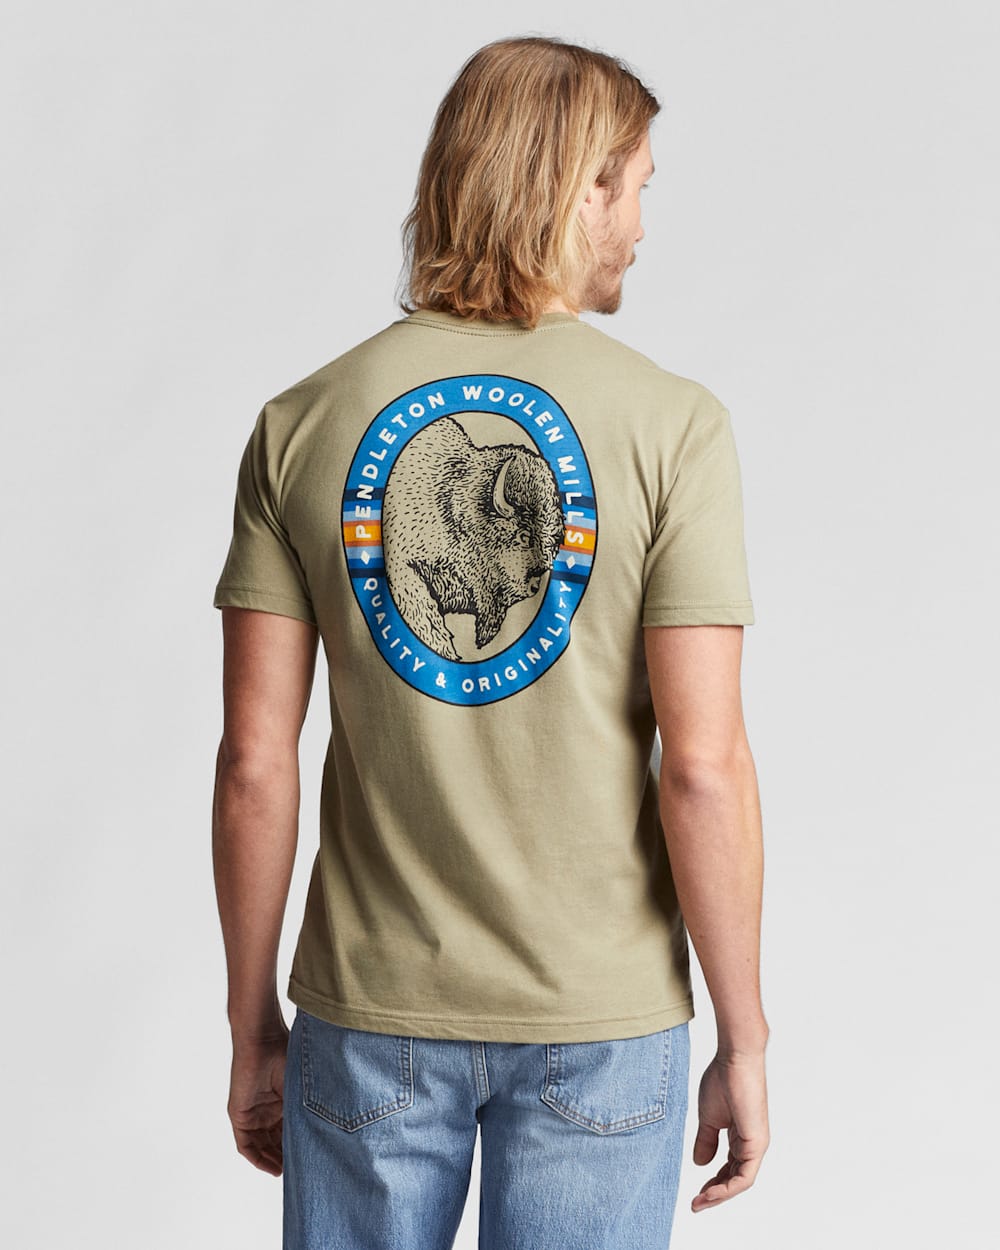 ALTERNATE VIEW OF MEN'S BISON HEAD GRAPHIC TEE IN LIGHT OLIVE/MULTI image number 2